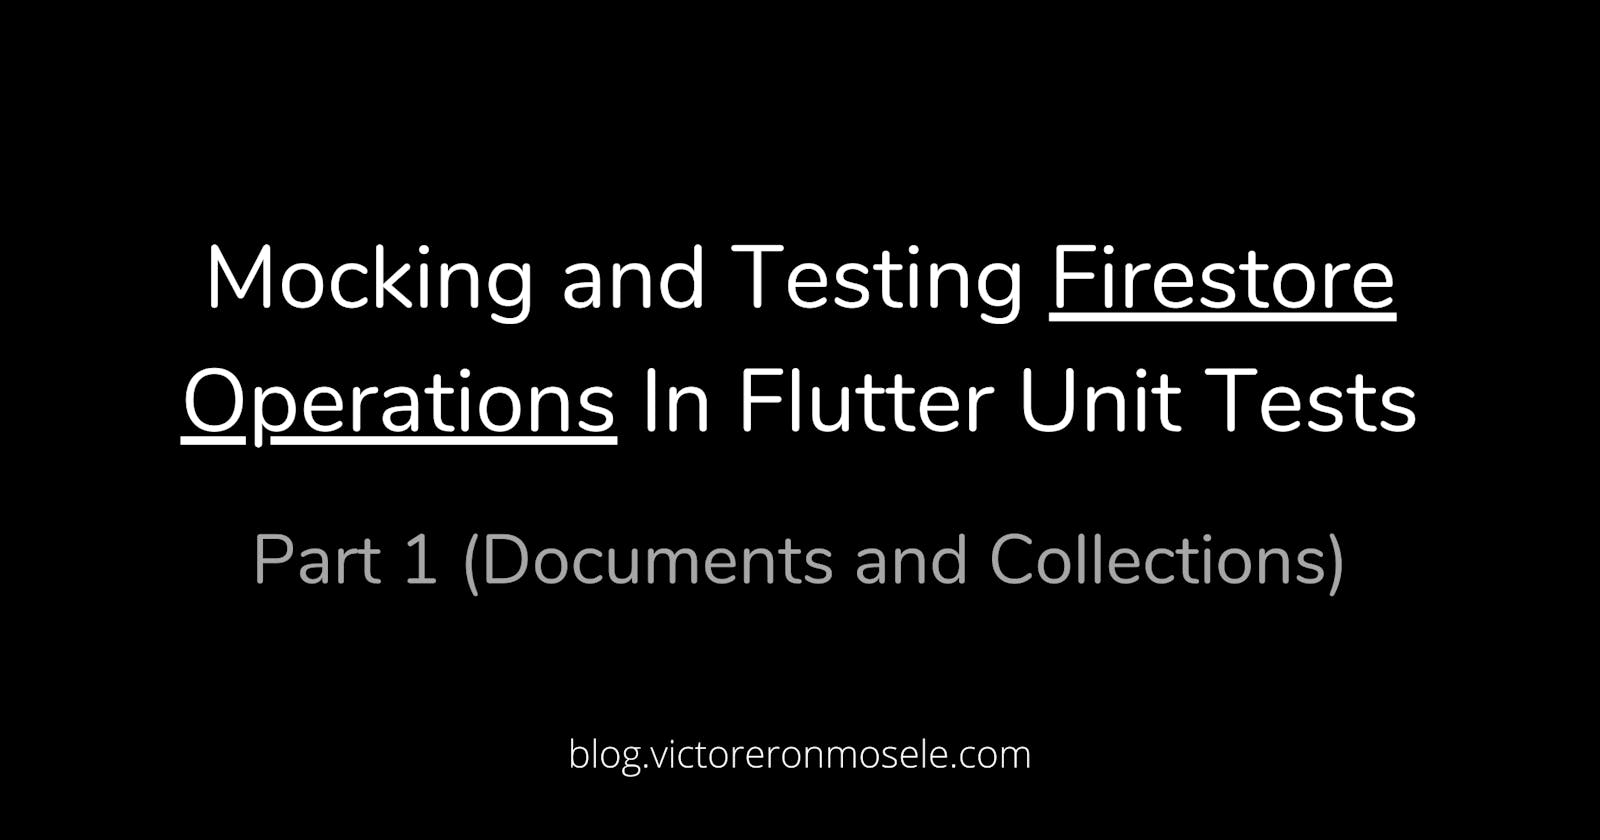 Mocking and Testing Firestore Operations in Flutter Unit Tests | Part 1 (Documents and Collections)